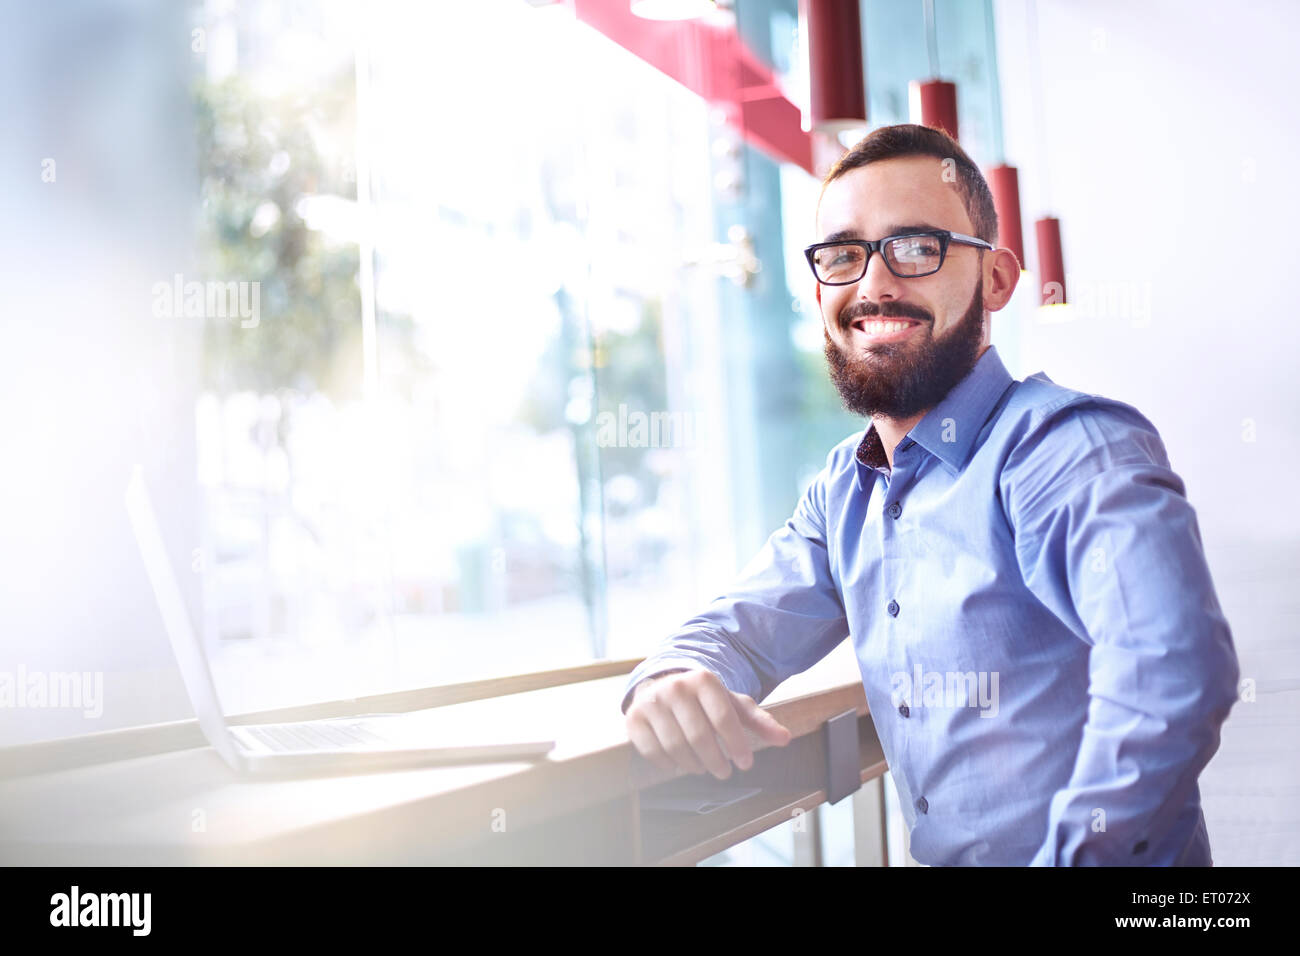 Portrait of smiling businessman with beard at laptop in cafe Banque D'Images